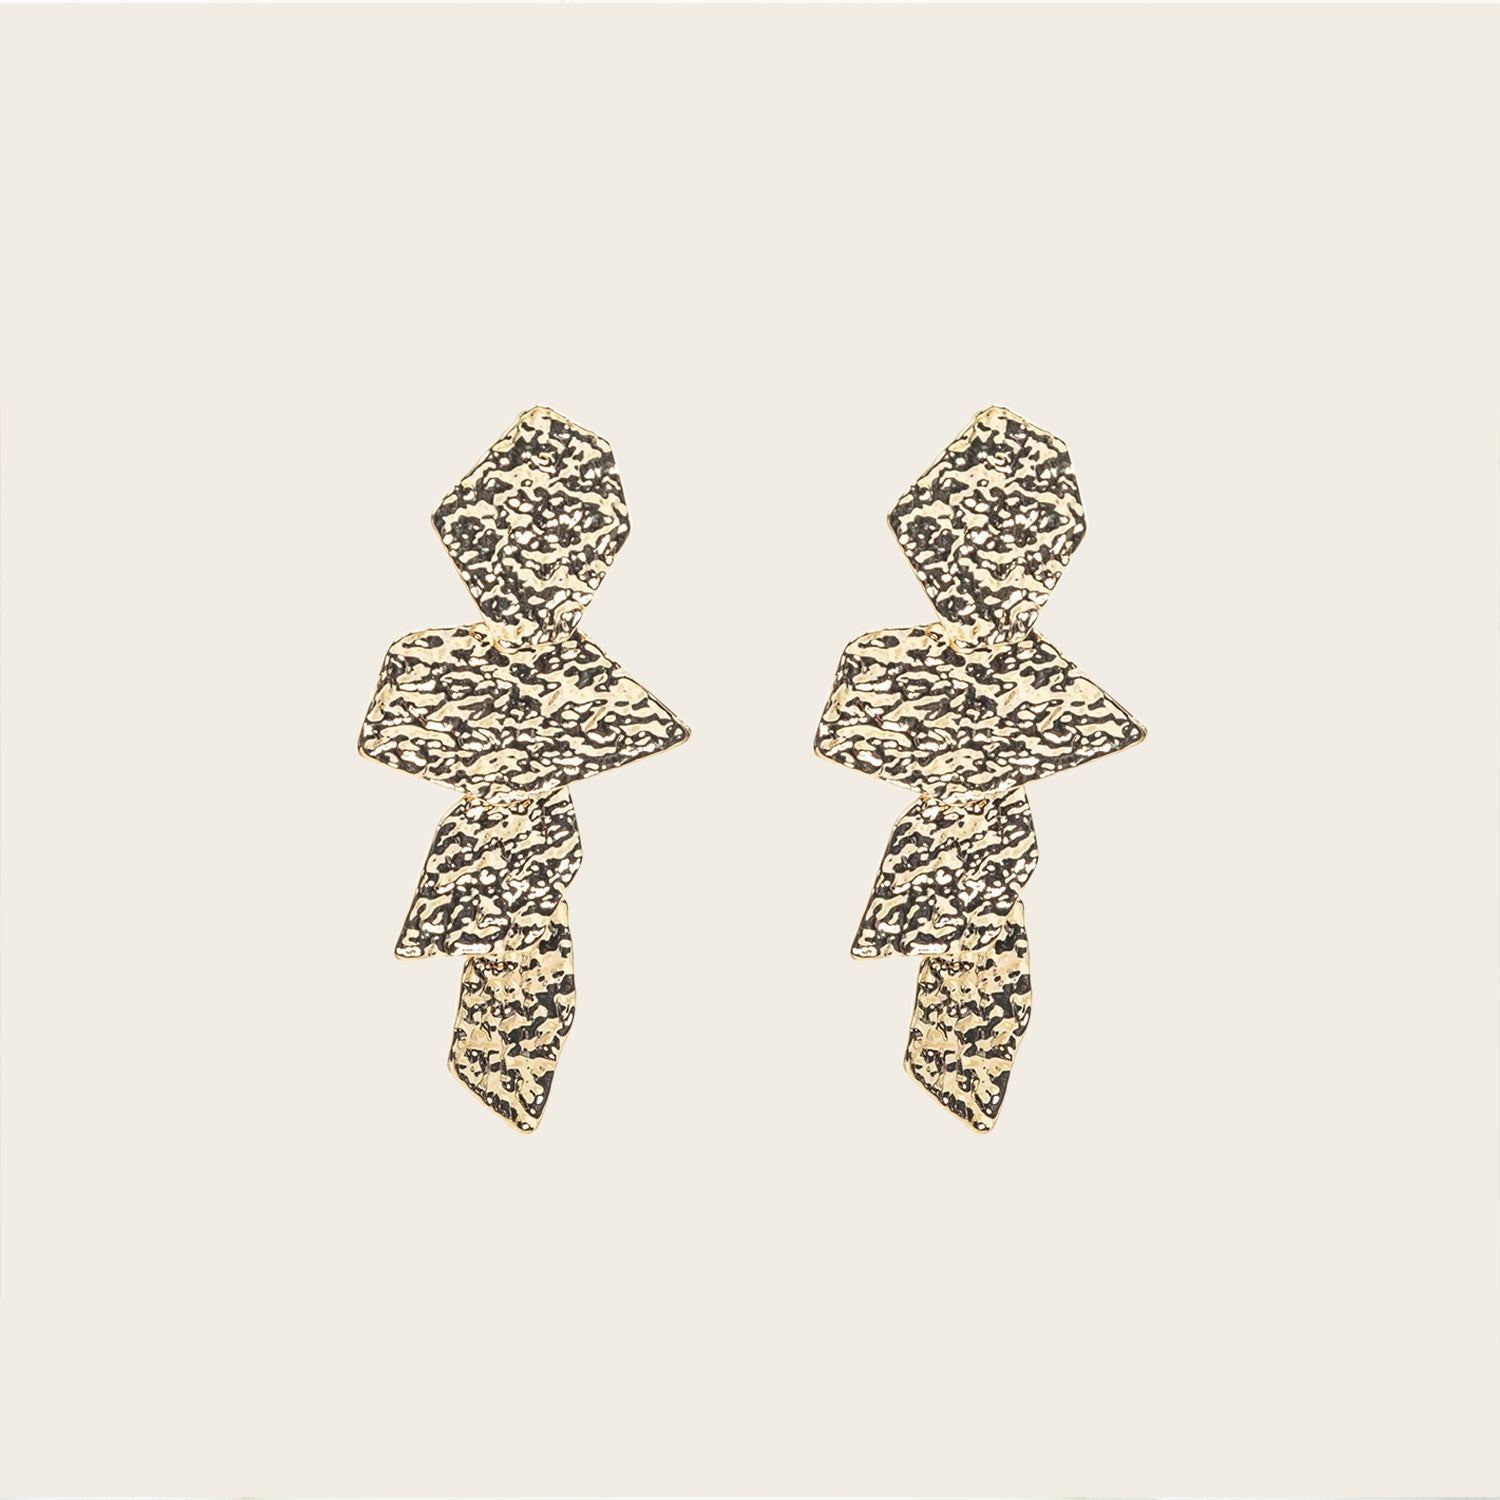 Image of the Manhattan Drop Clip On Earrings in Gold provide a secure and comfortable fit for any ear type. The padded clip-on design features a zinc and copper alloy construction, and lasts approximately 8-12 hours. As the earring pairs are non-adjustable, each purchase contains a single pair.